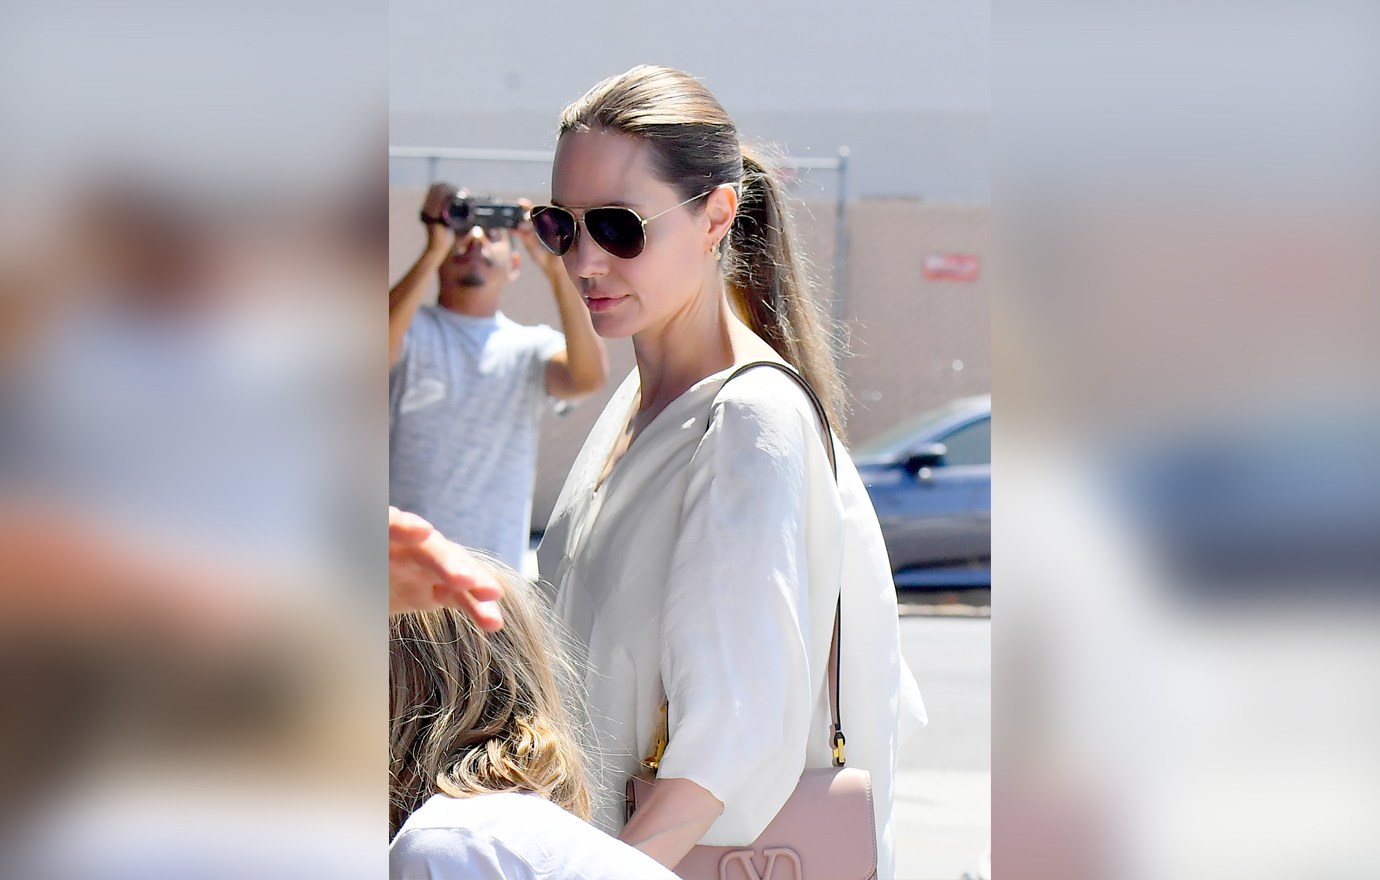 Angelina Jolie and Vivienne Jolie-Pitt head to a dog supply store in Los Angeles